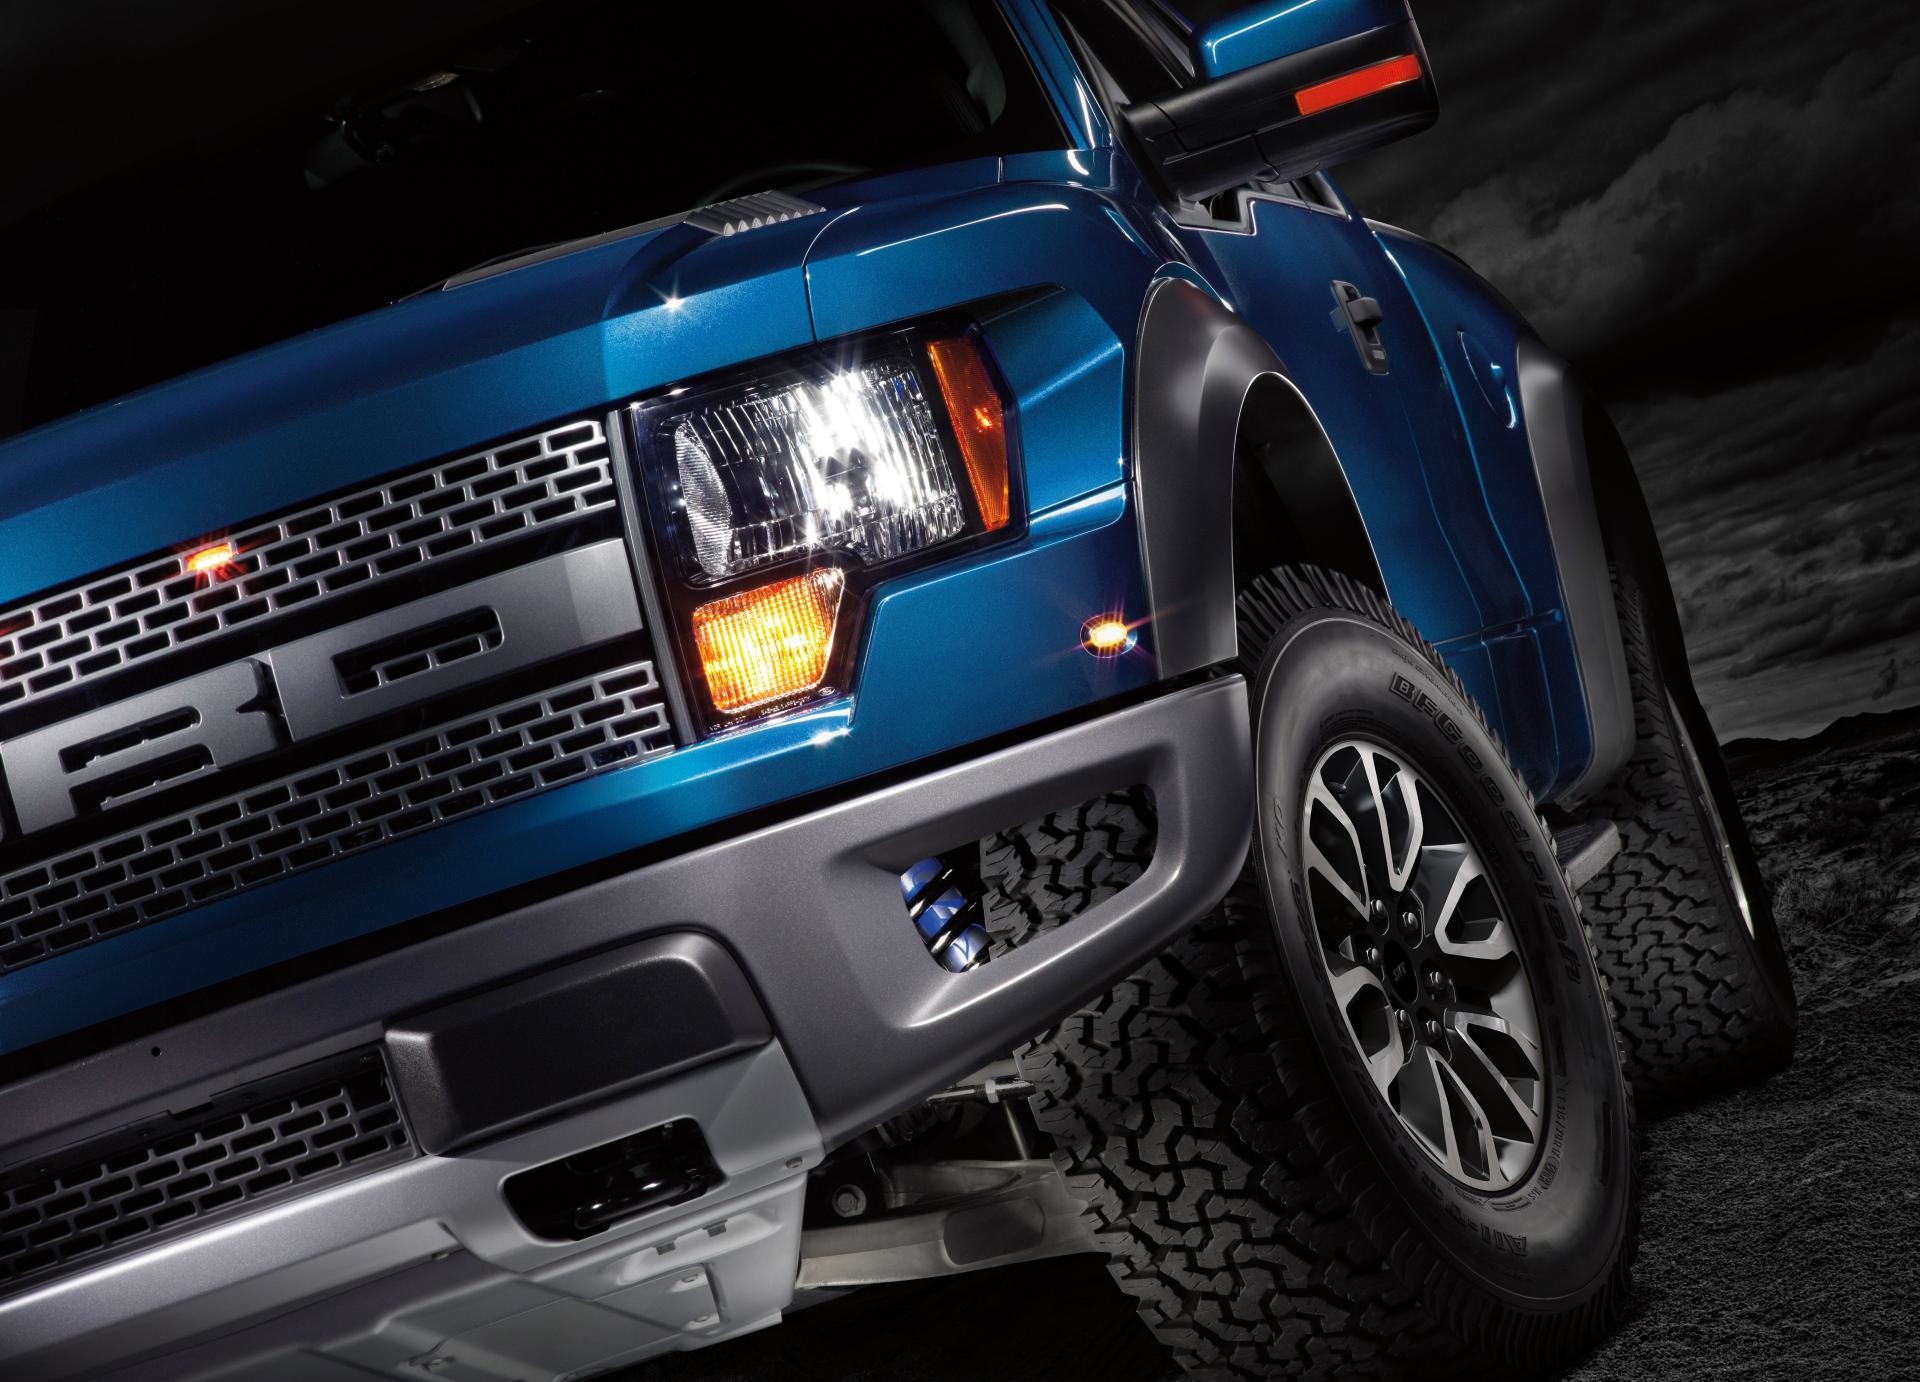 1920x1382 ... car wallpaper hd ford truck wallpapers picture at bozhuwallpaper ...